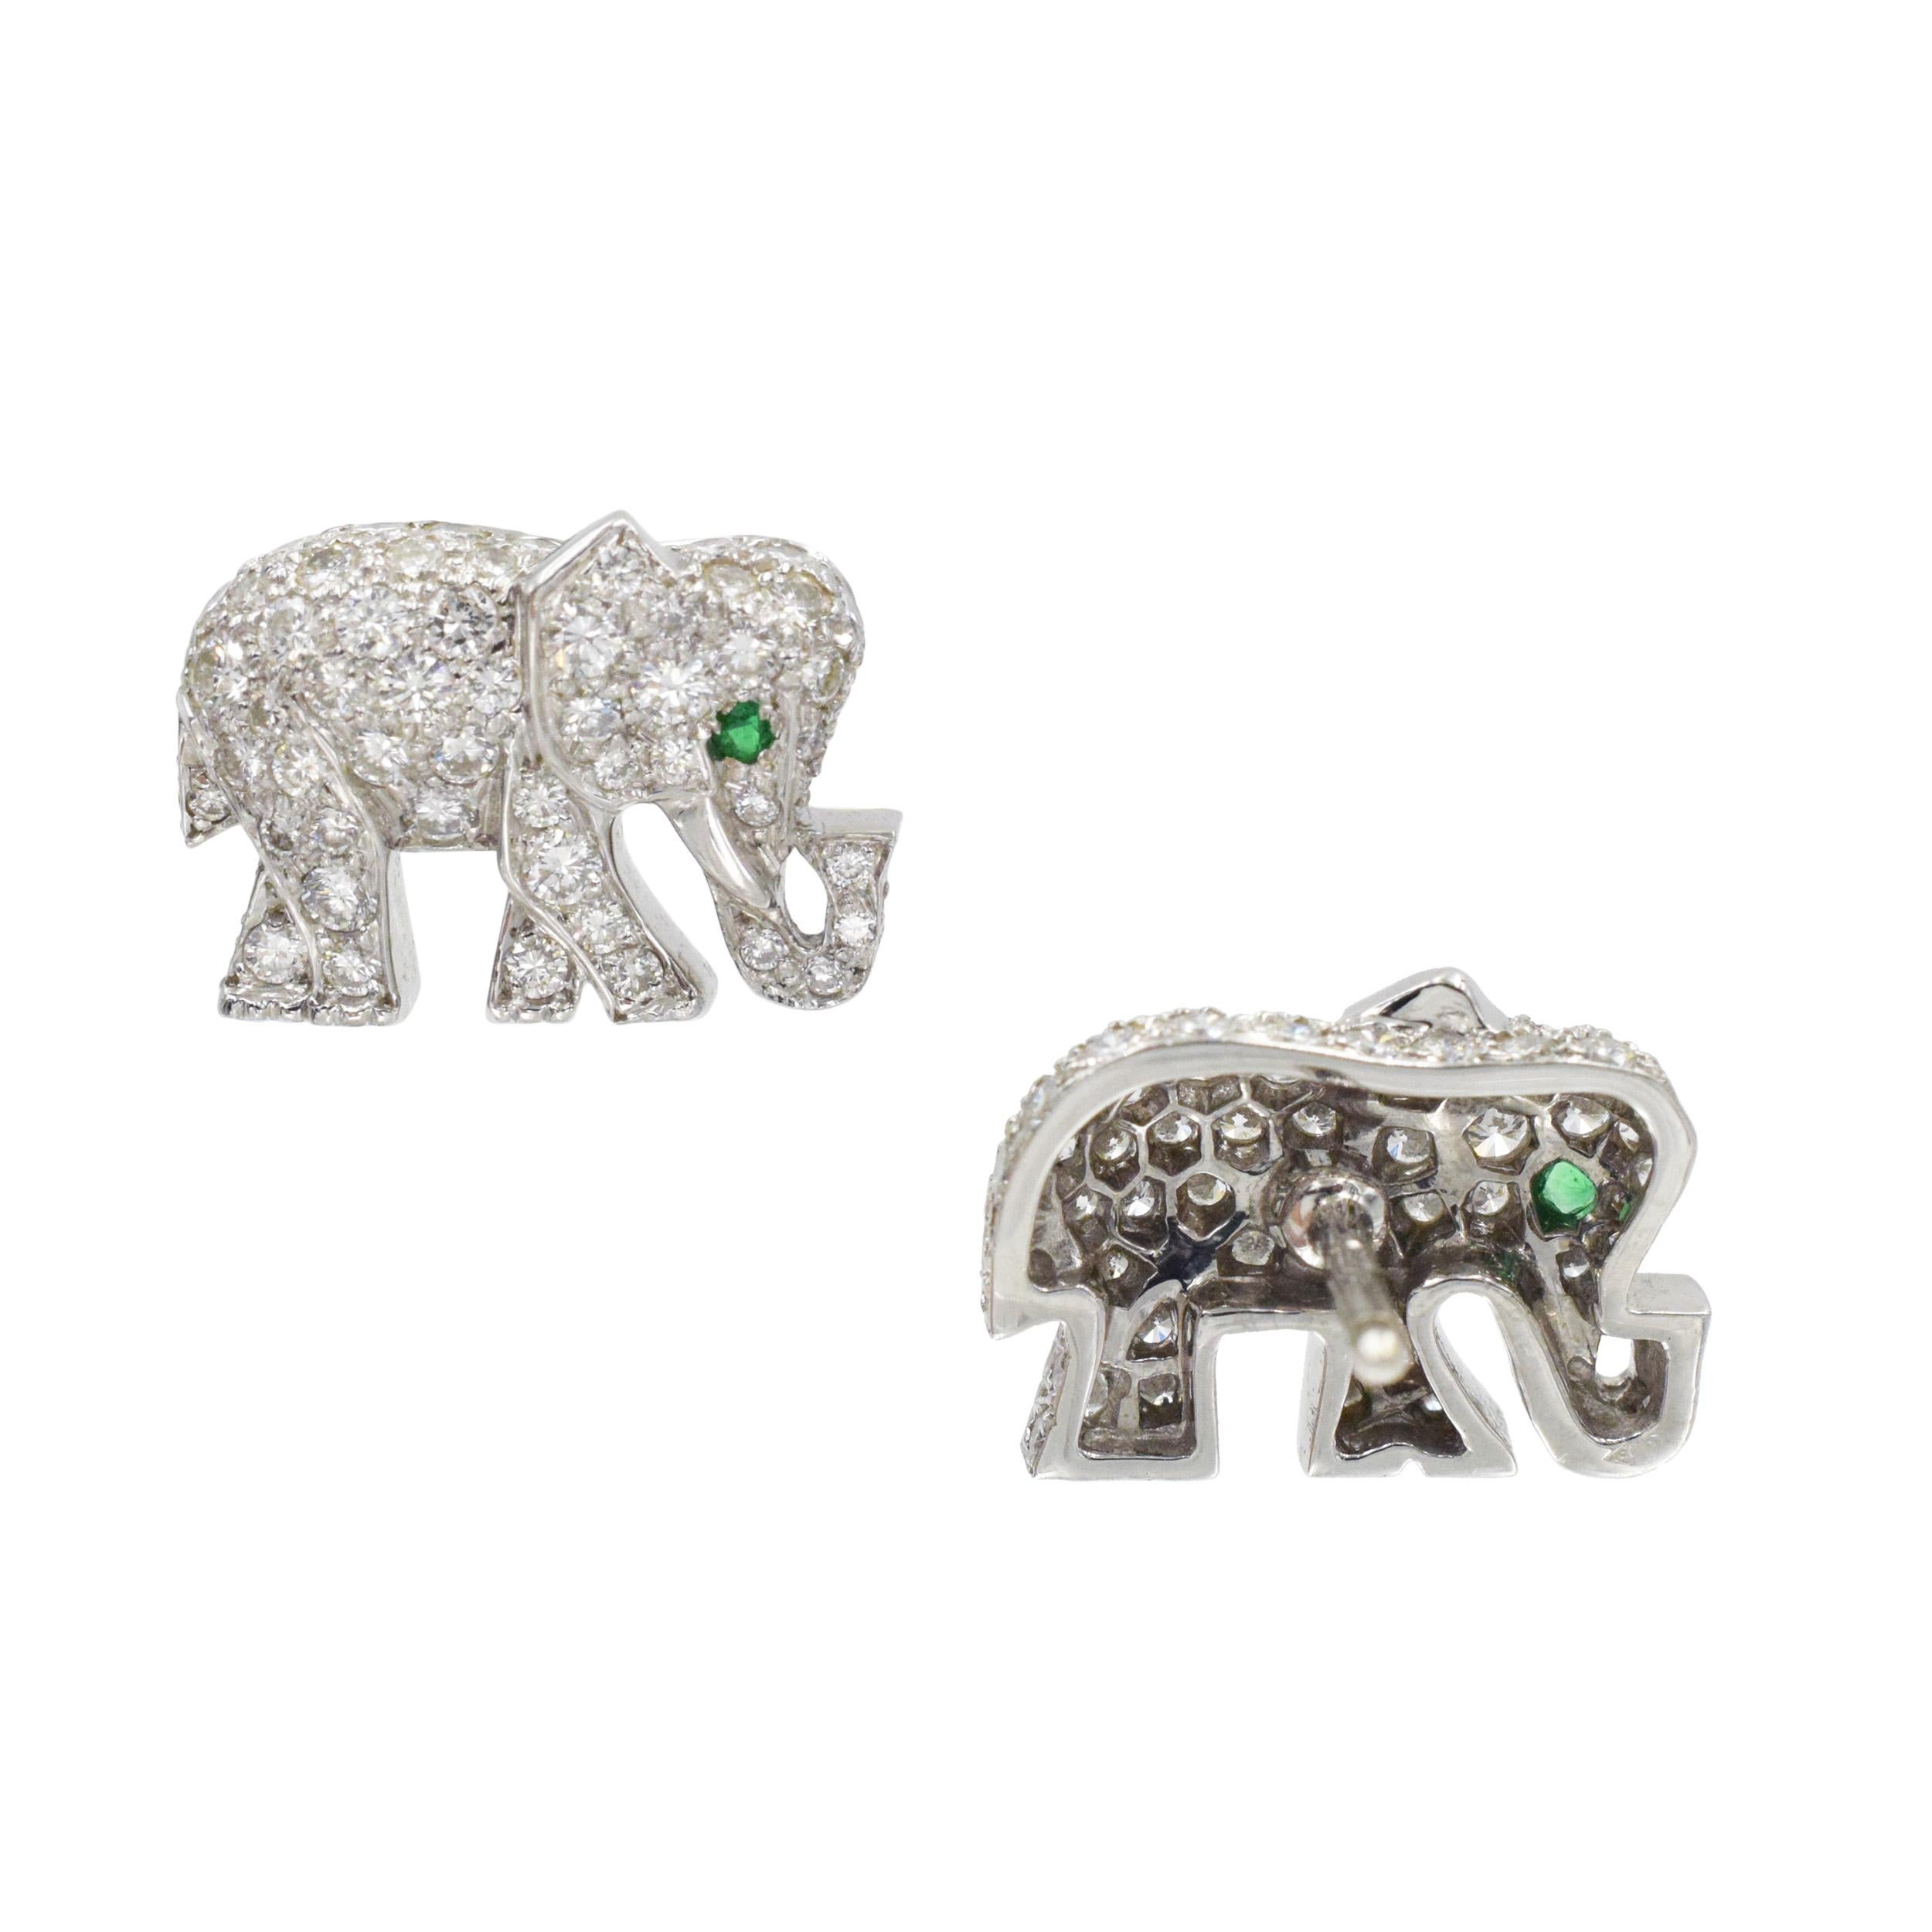 Cartier Diamond and Emerald Elephant Brooch and Earrings Set In Platinum. 5